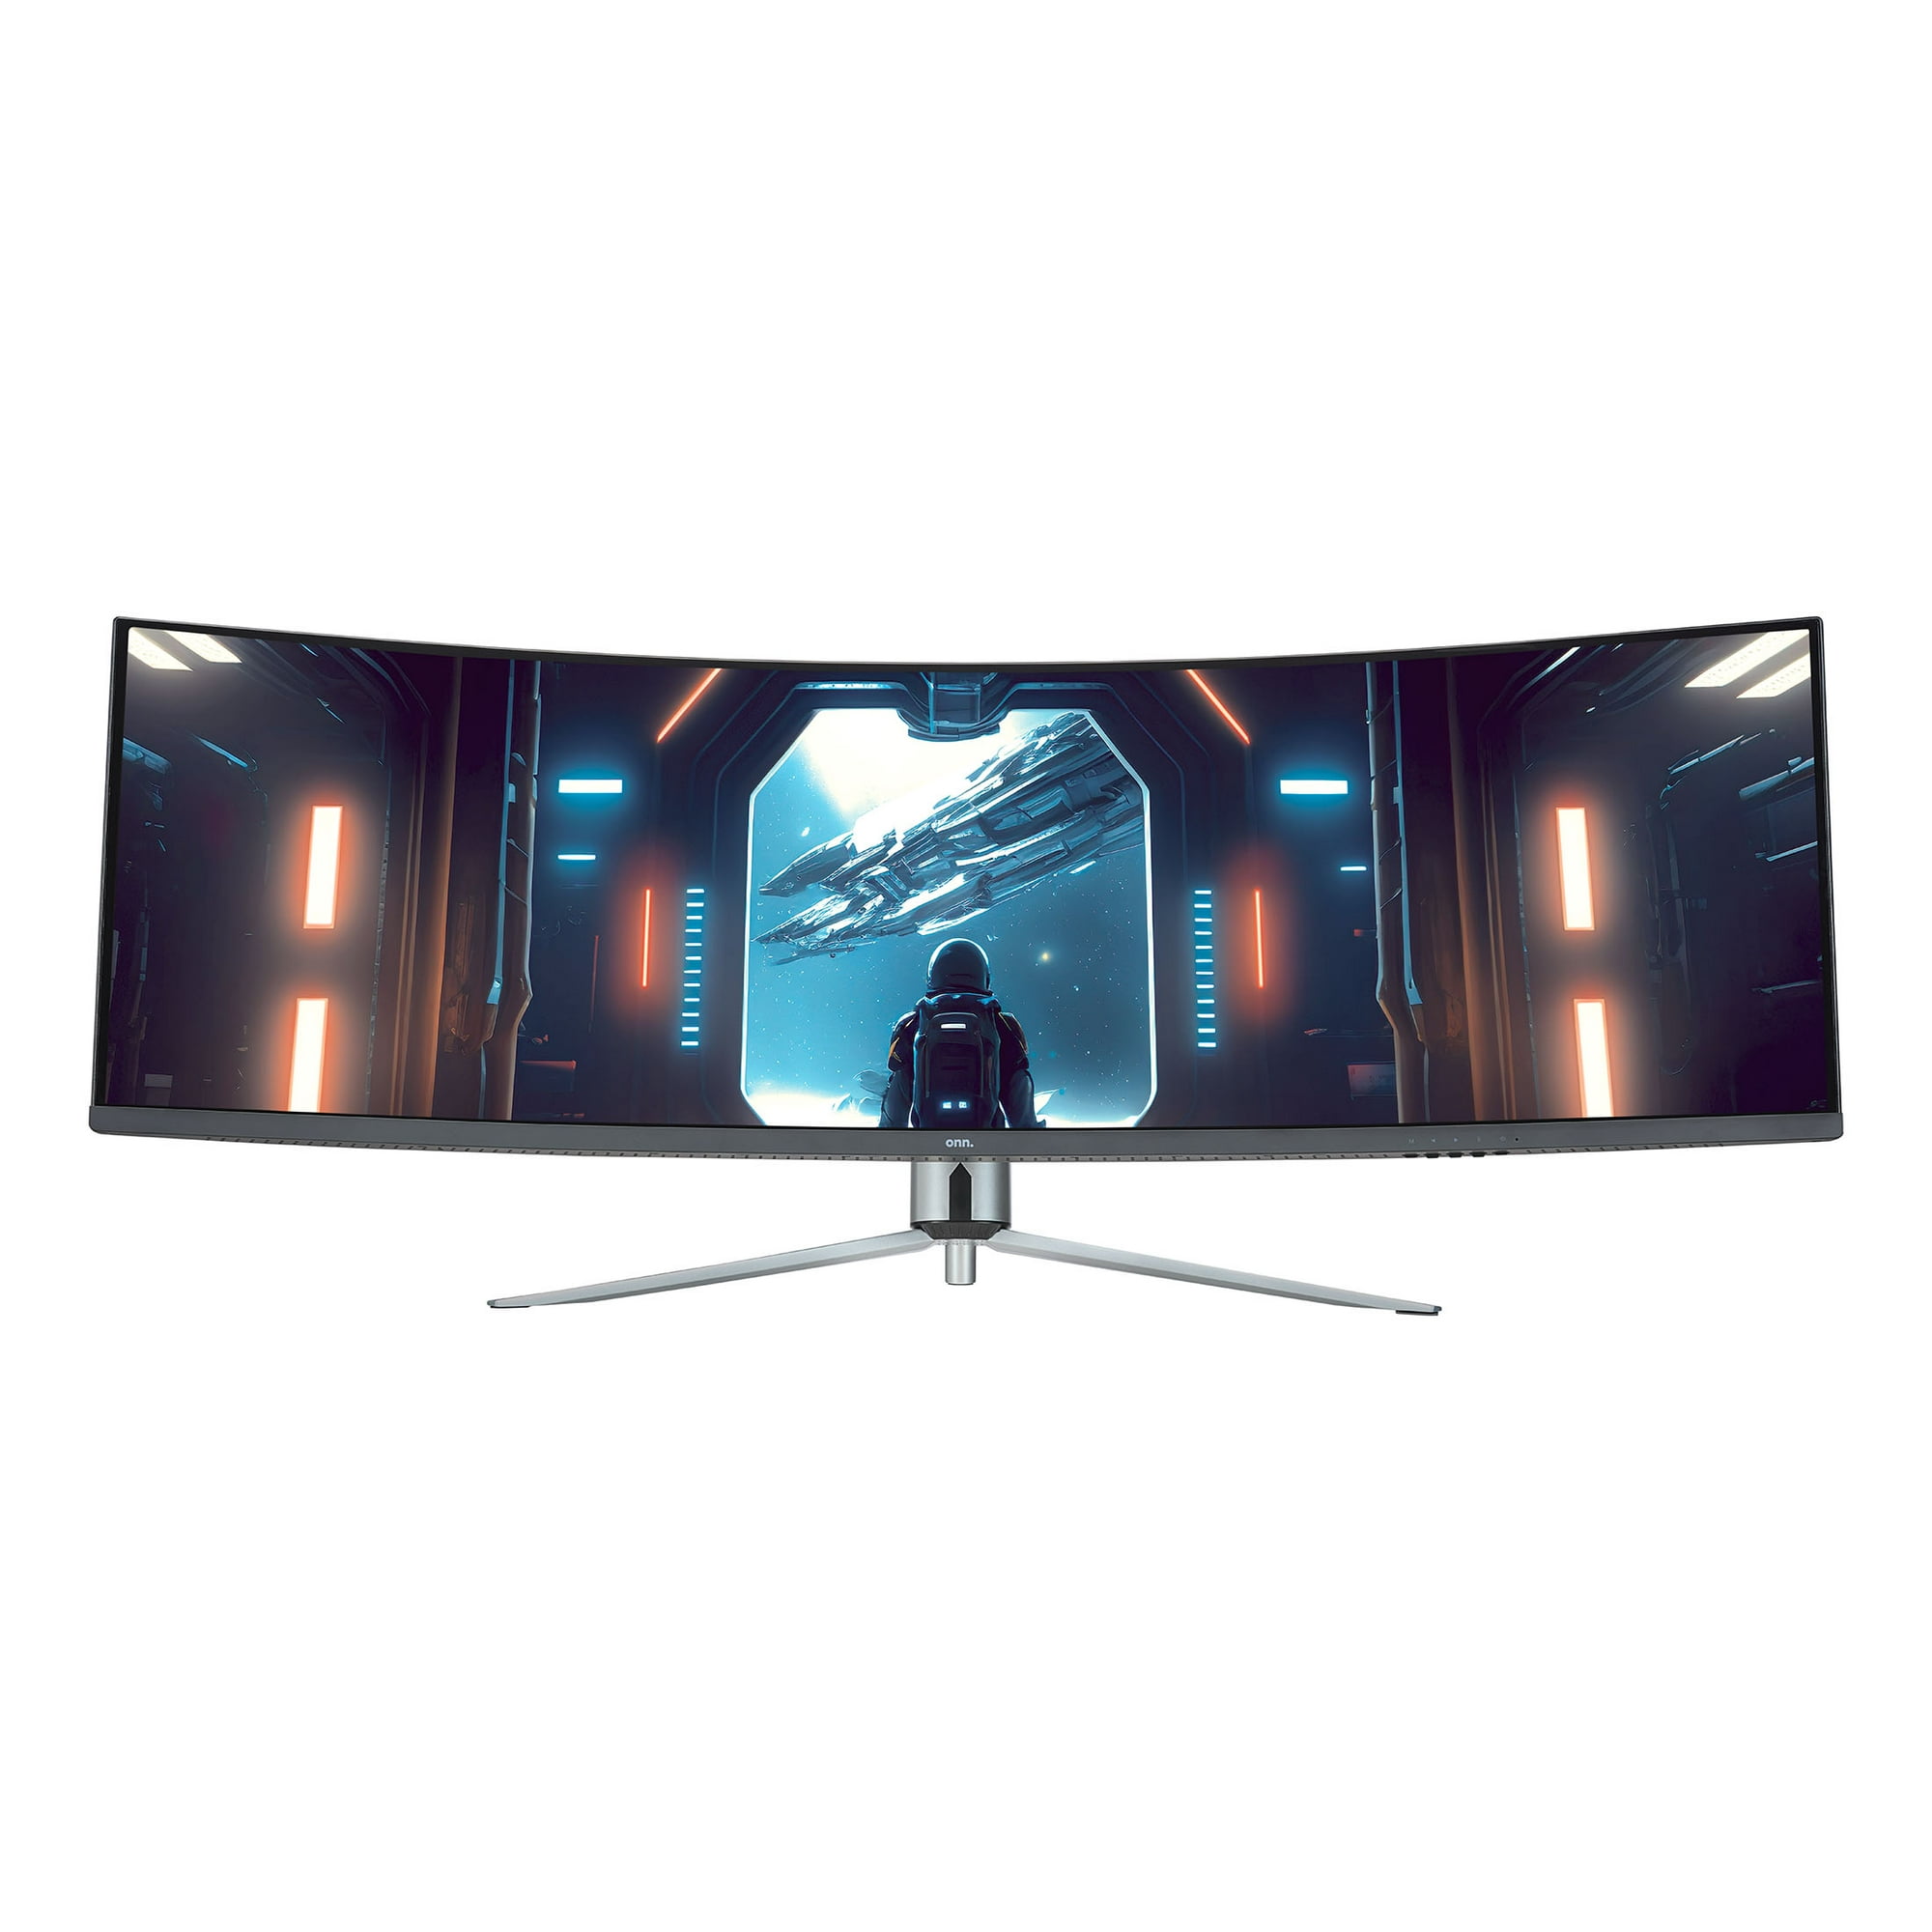 onn. (100133225) 49″ (3840 x 1080) 144Hz 1ms Curved Dual FHD Gaming Monitor with 6ft DisplayPort/HDMI Cables